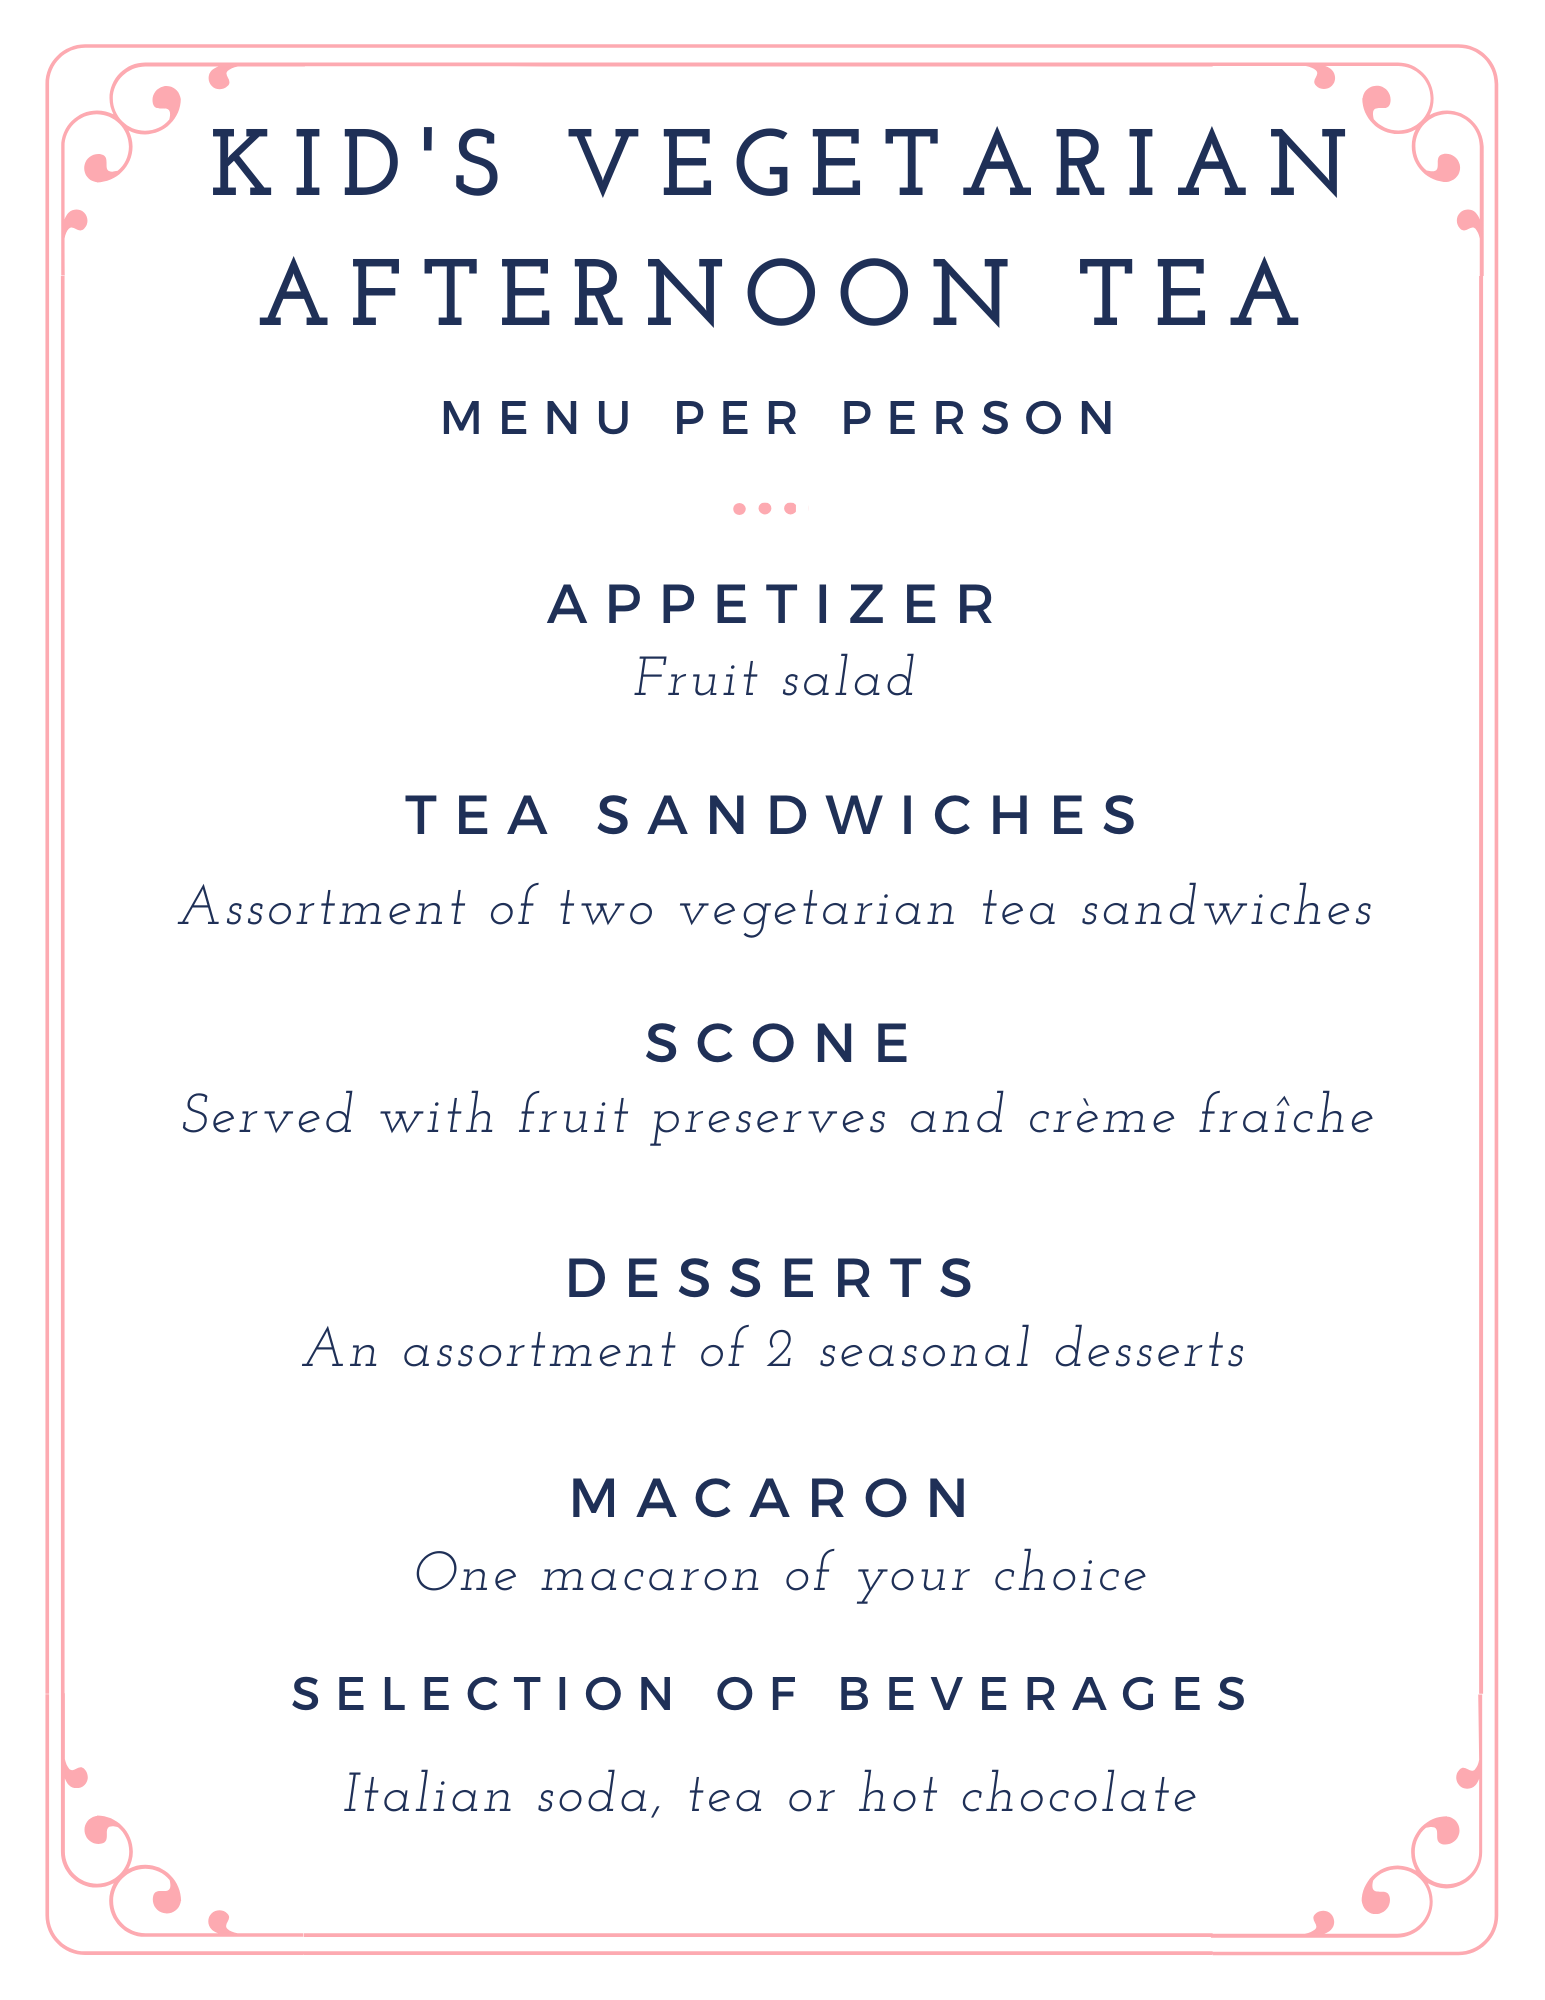 Afternoon Tea to go!